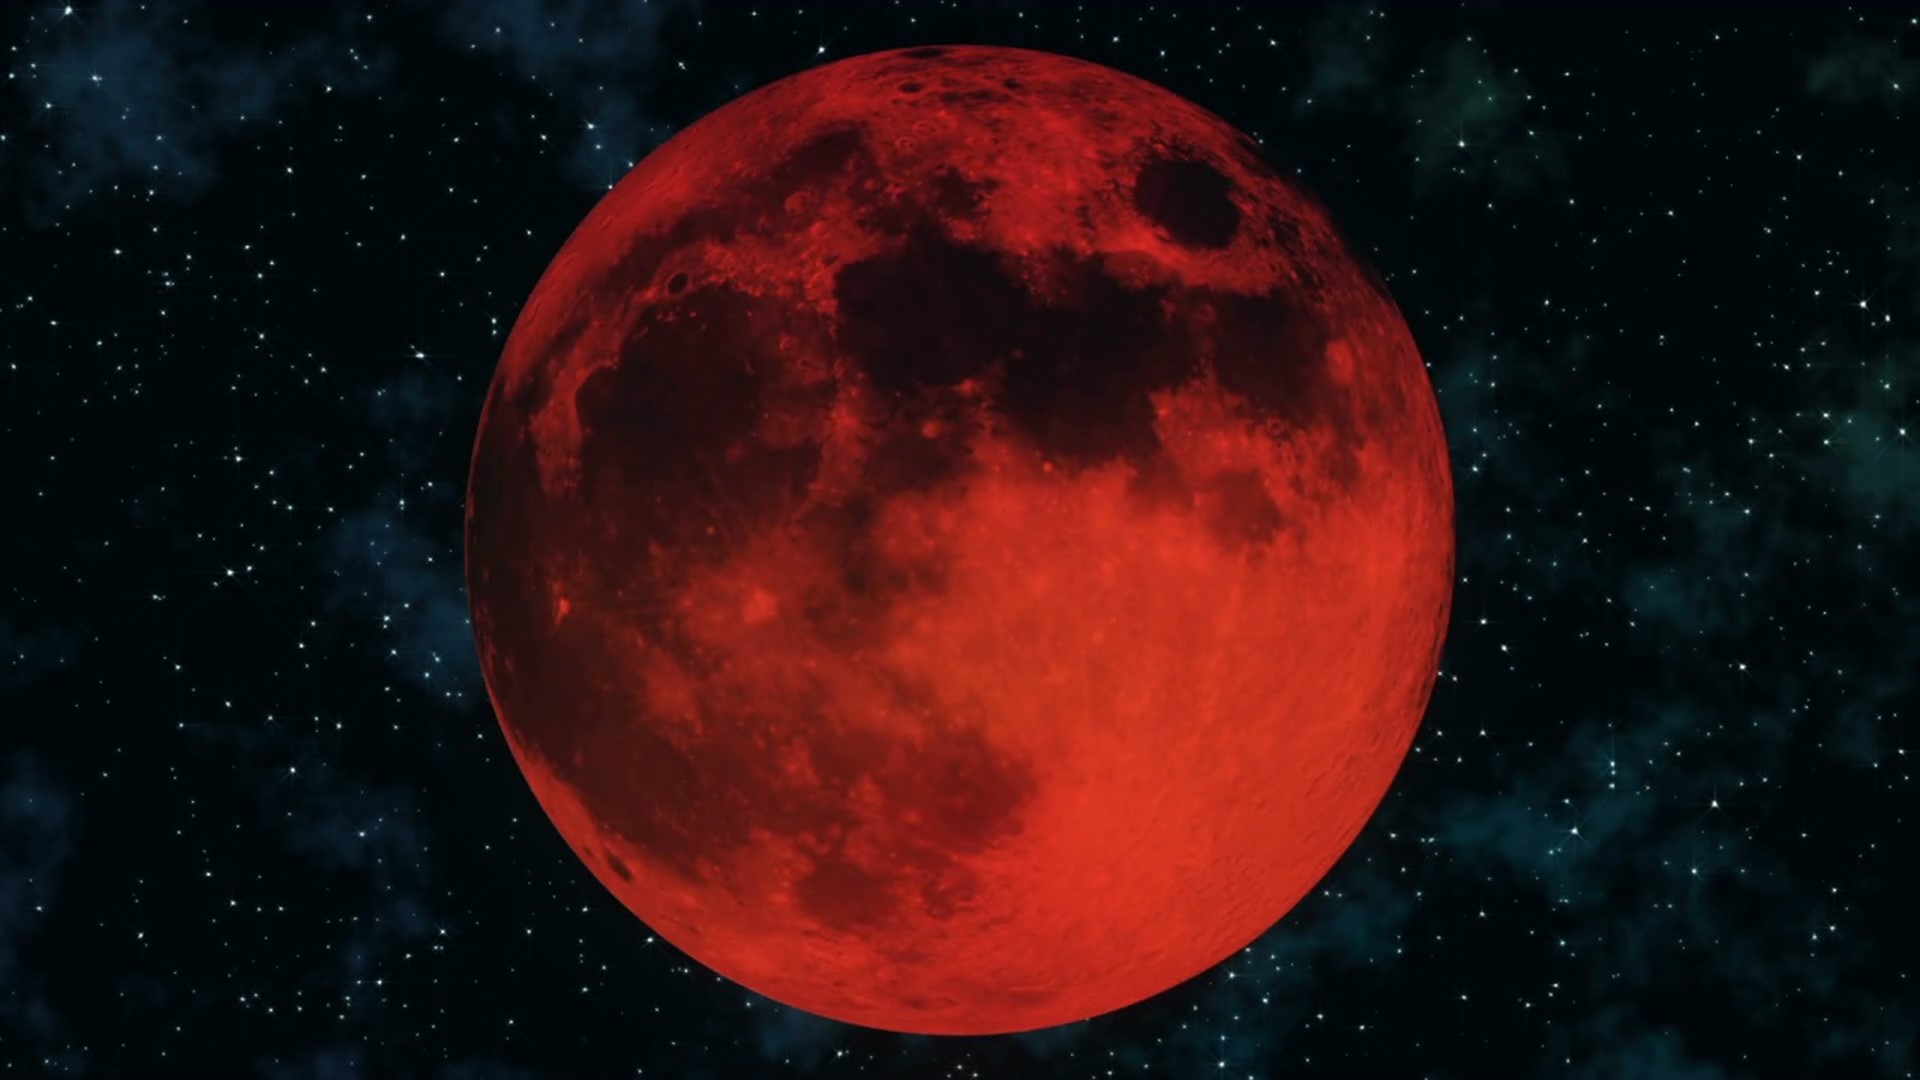 This month's Full Moon is called a Blood Moon due to the lunar eclipse that will be underway.